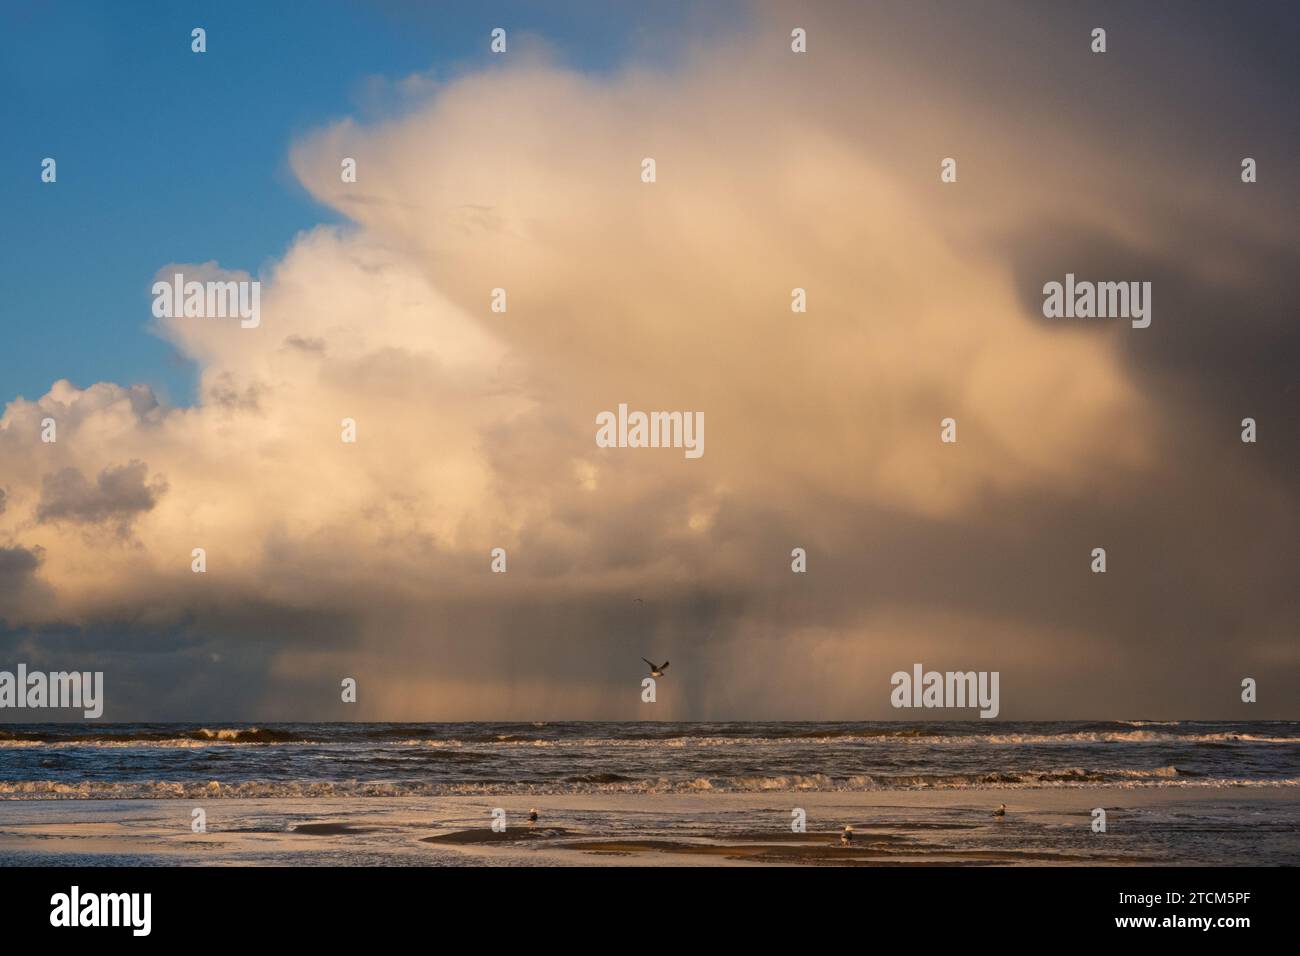 Seagulls on and near the beach in the background a gigantic cloud from which it rains Stock Photo